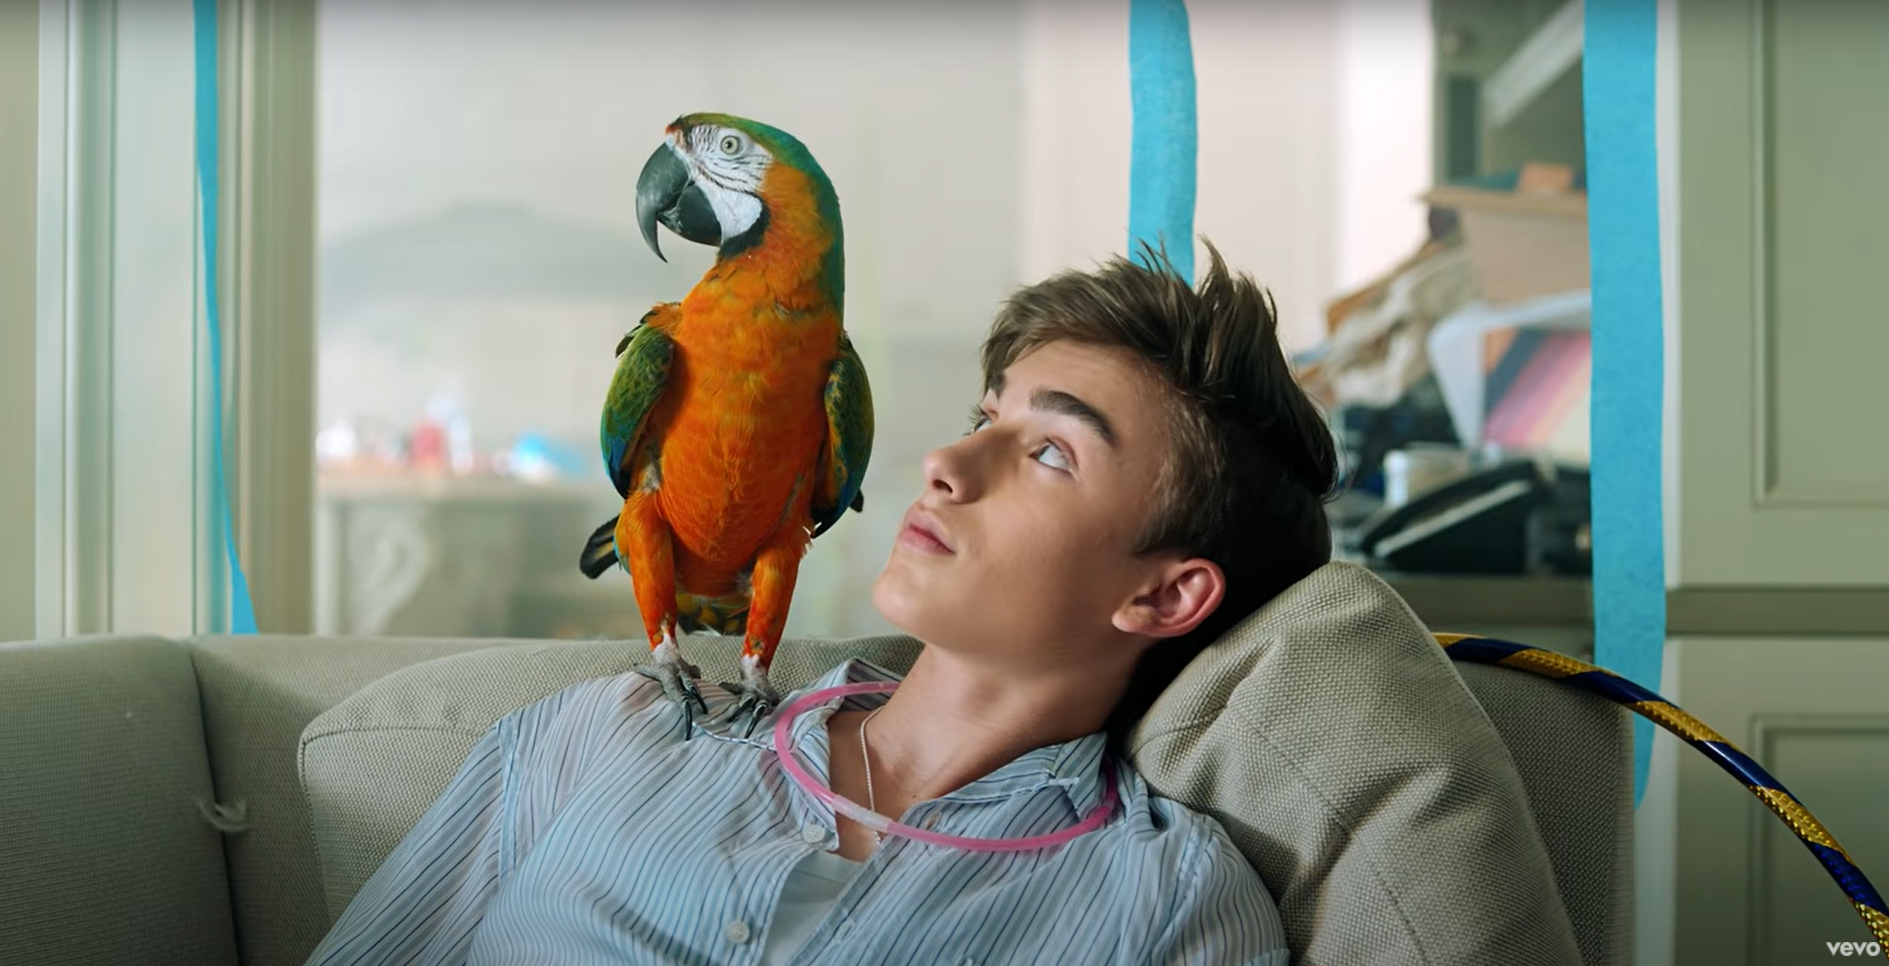 Johnny Orlando All the Parties Video with Bird